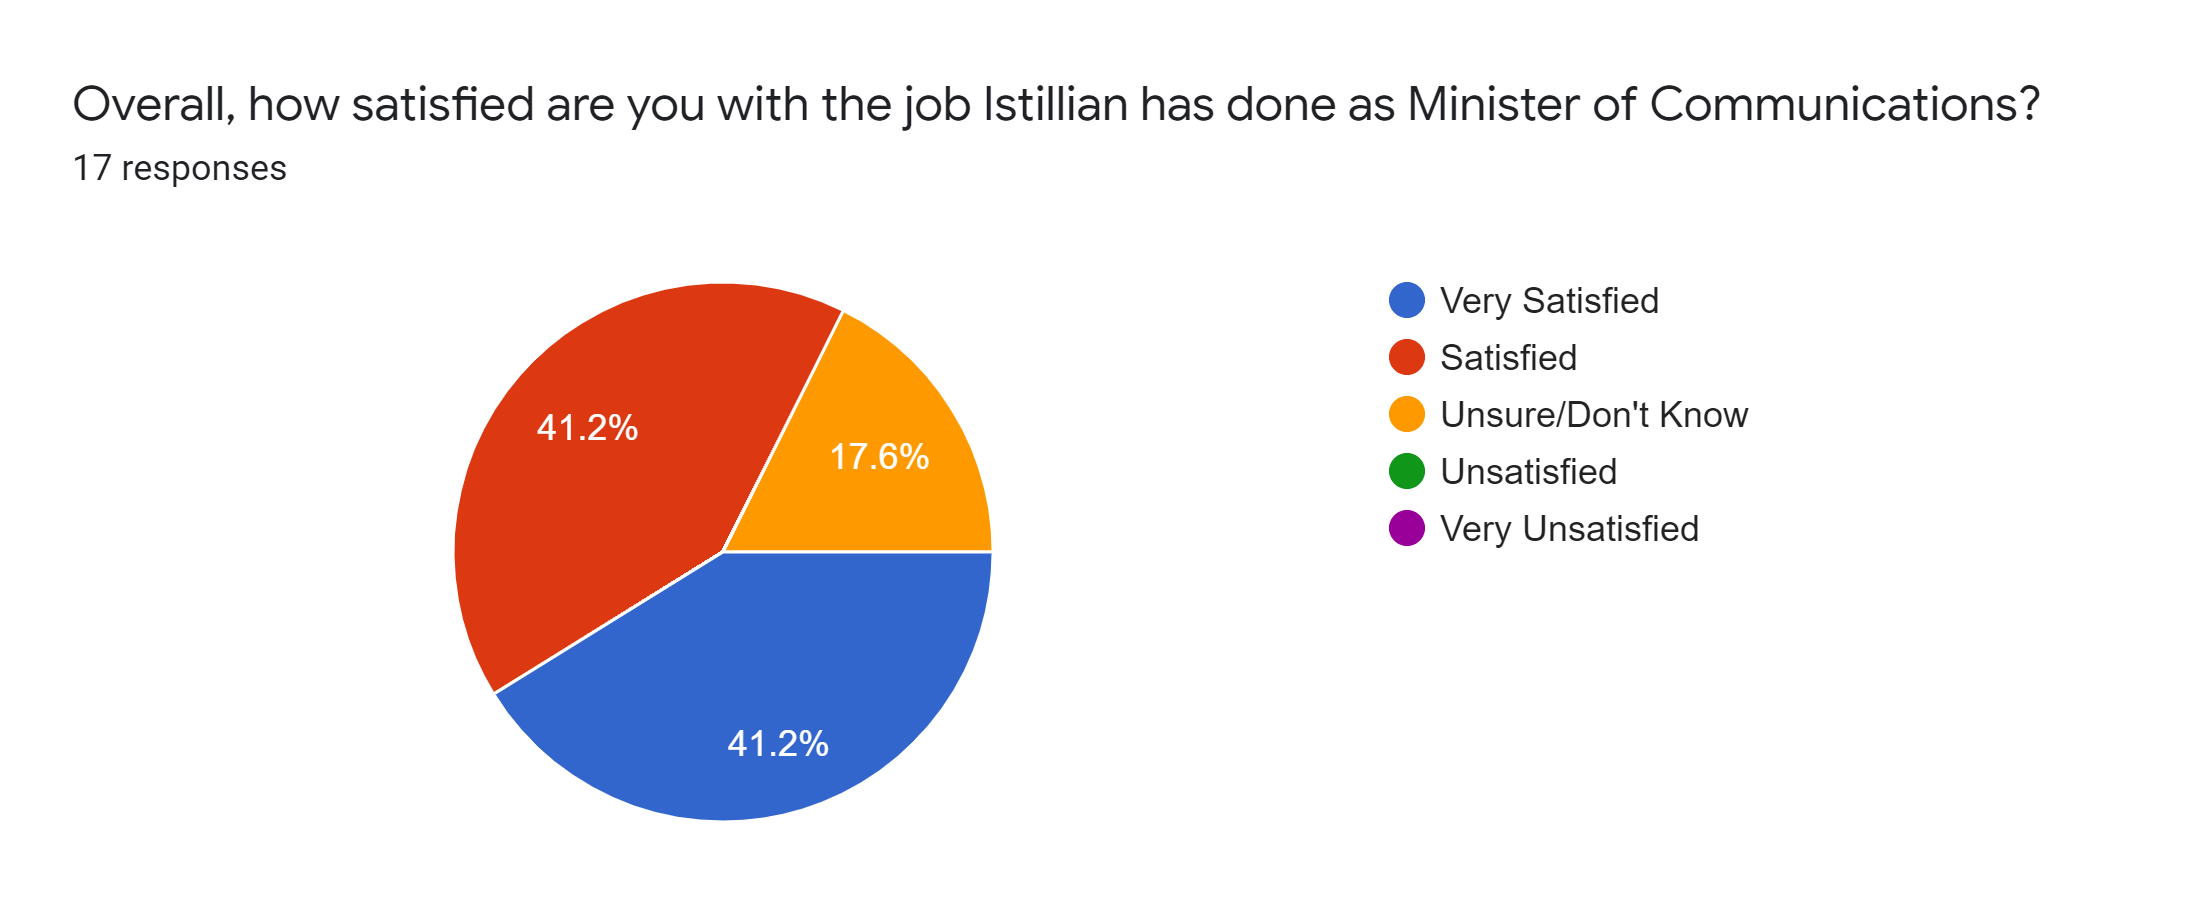 Forms response chart. Question title: Overall, how satisfied are you with the job Istillian has done as Minister of Communications?. Number of responses: 17 responses.